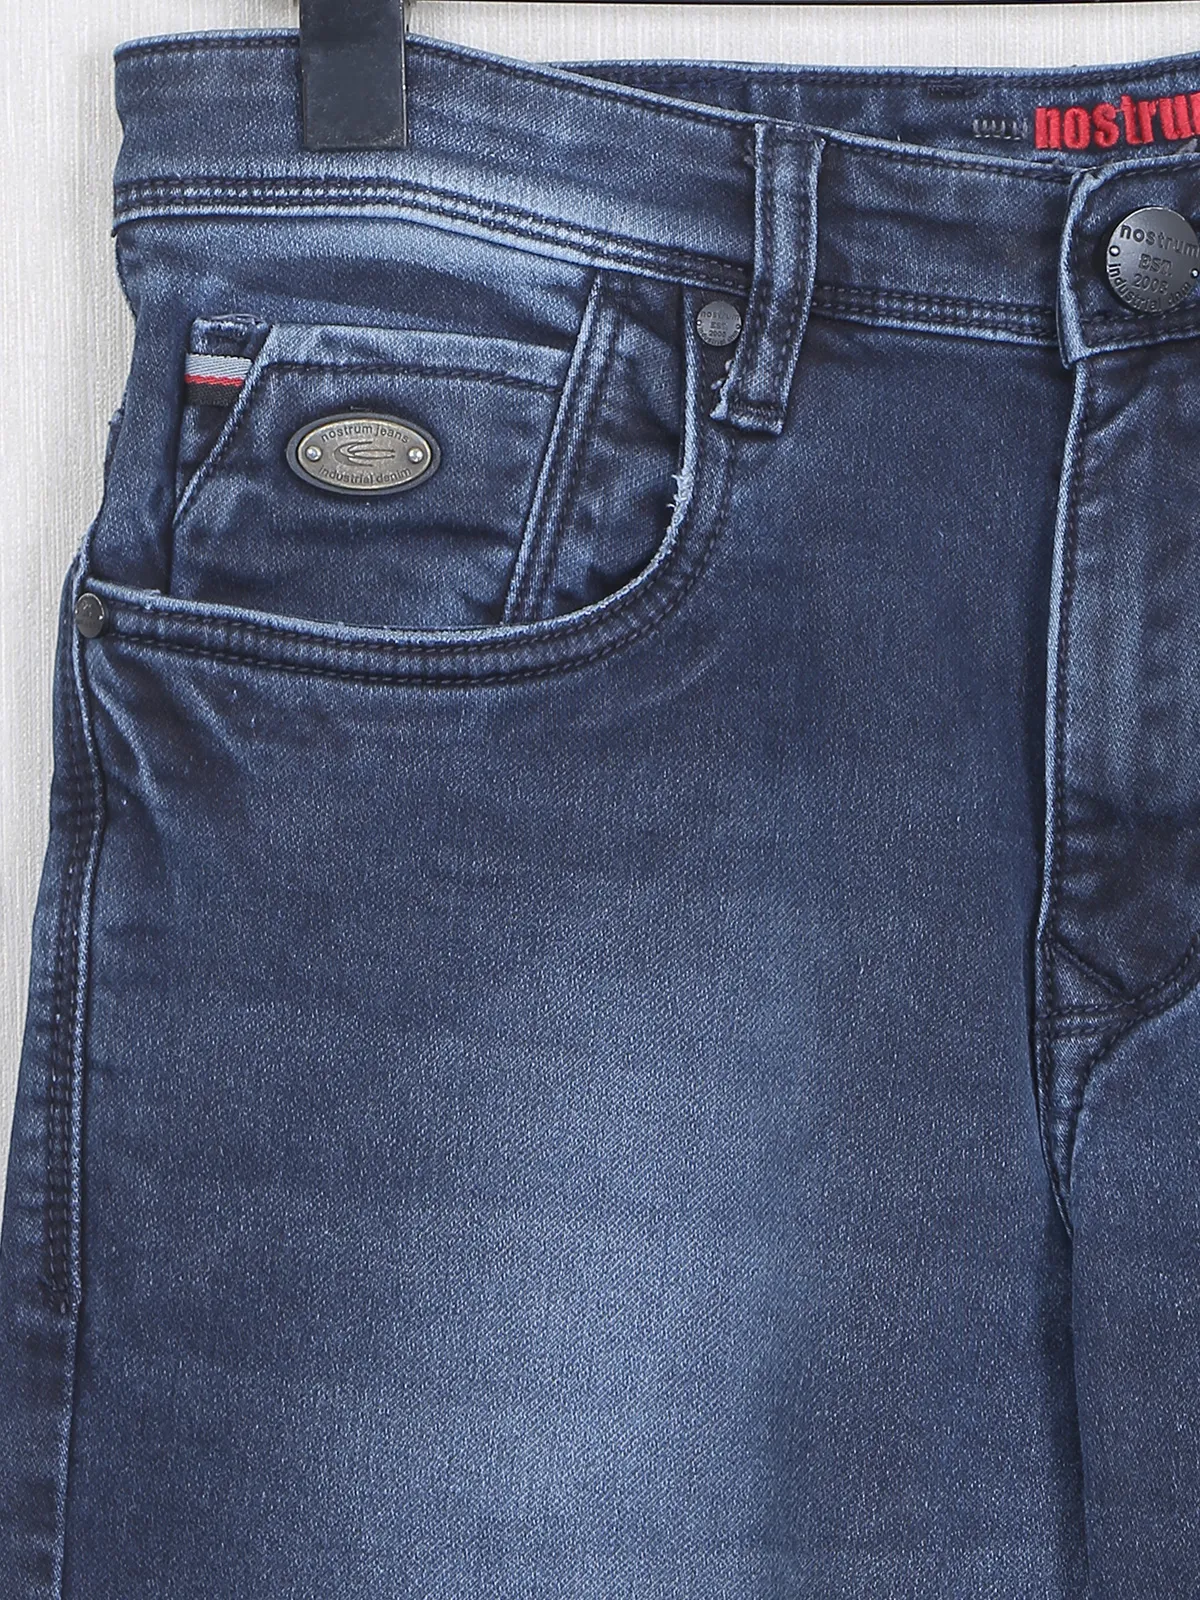 Dark blue colored washed jeans from Nostrum